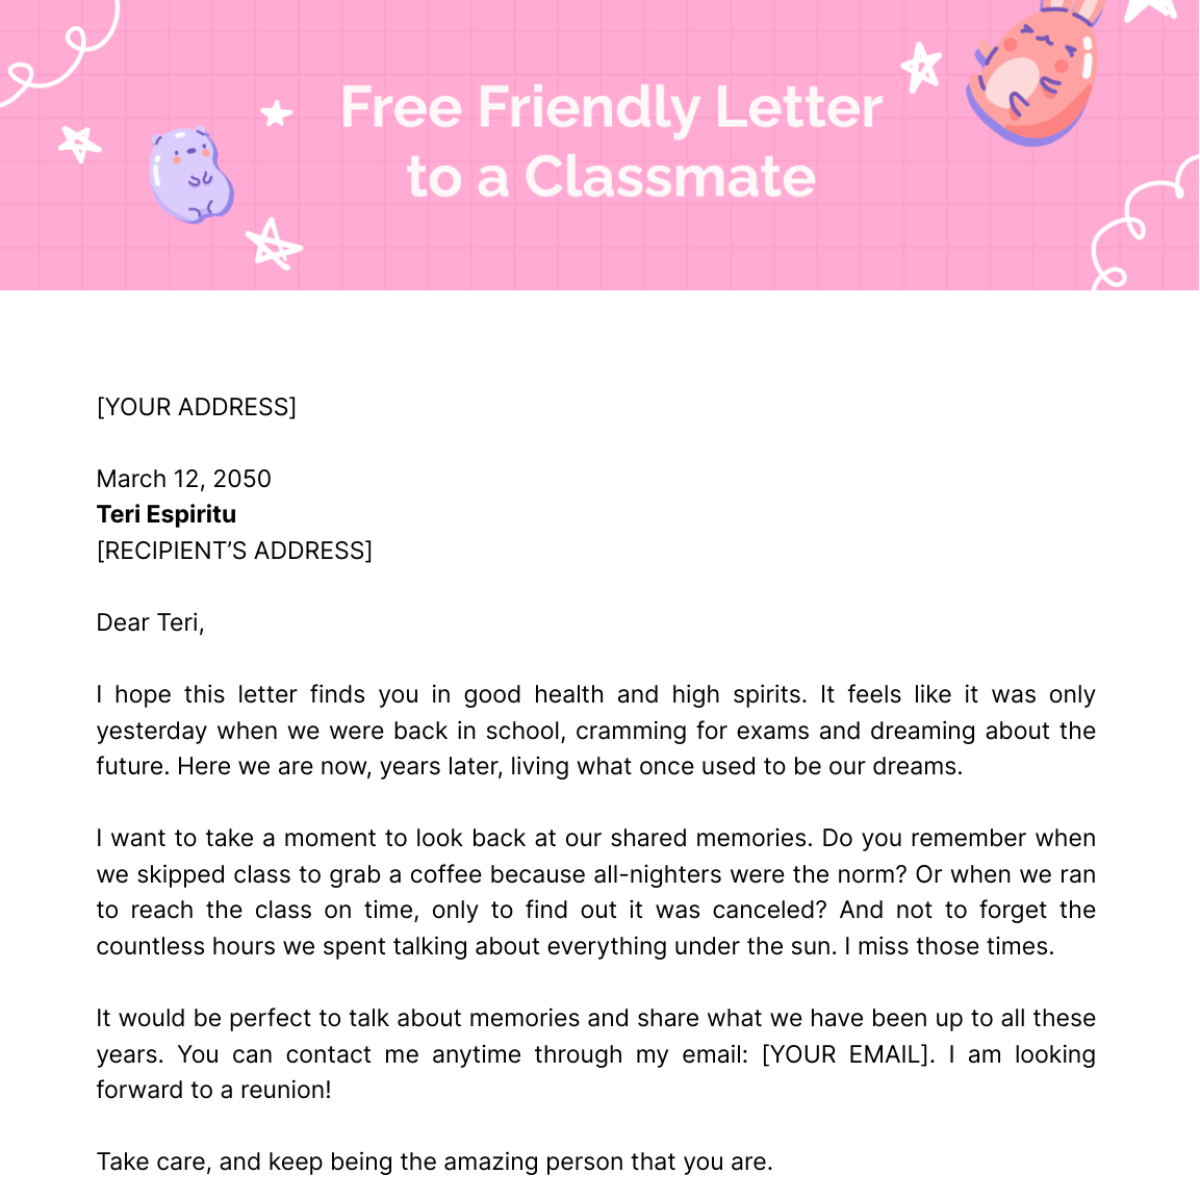 Friendly Letter to a Classmate Template